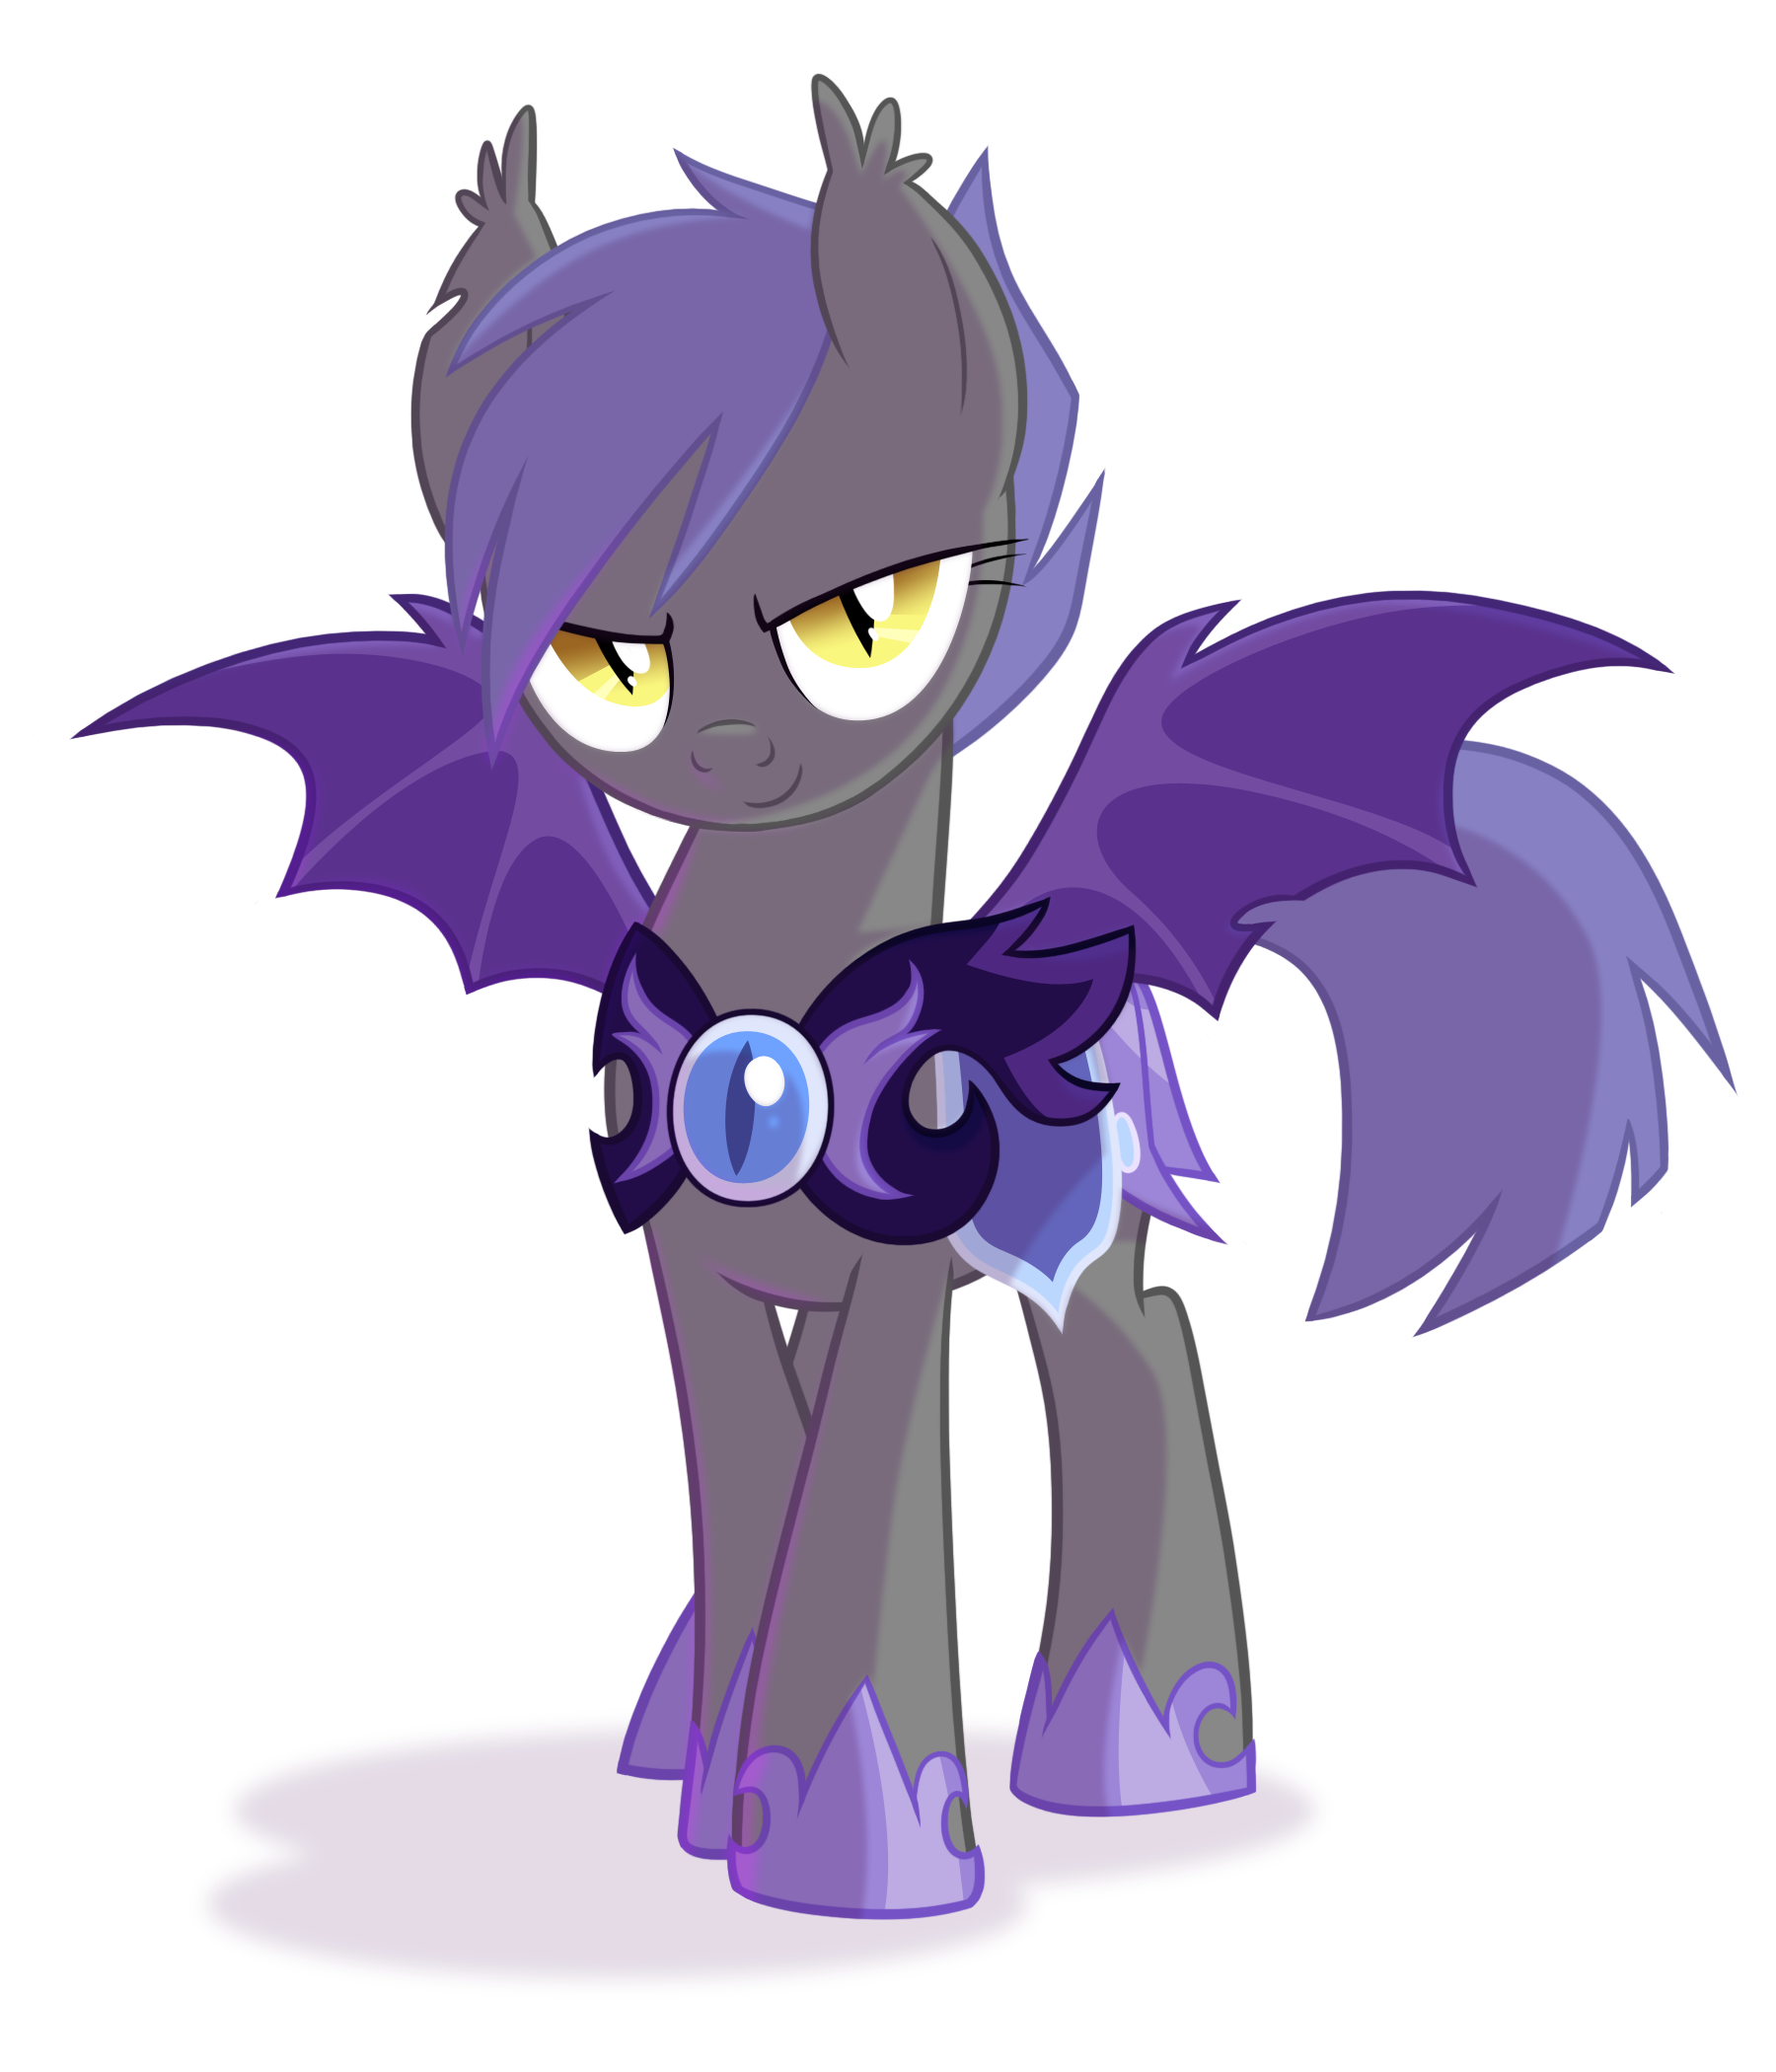 [Obrázek: the_shadow_by_equestria_prevails-d54glun.png]